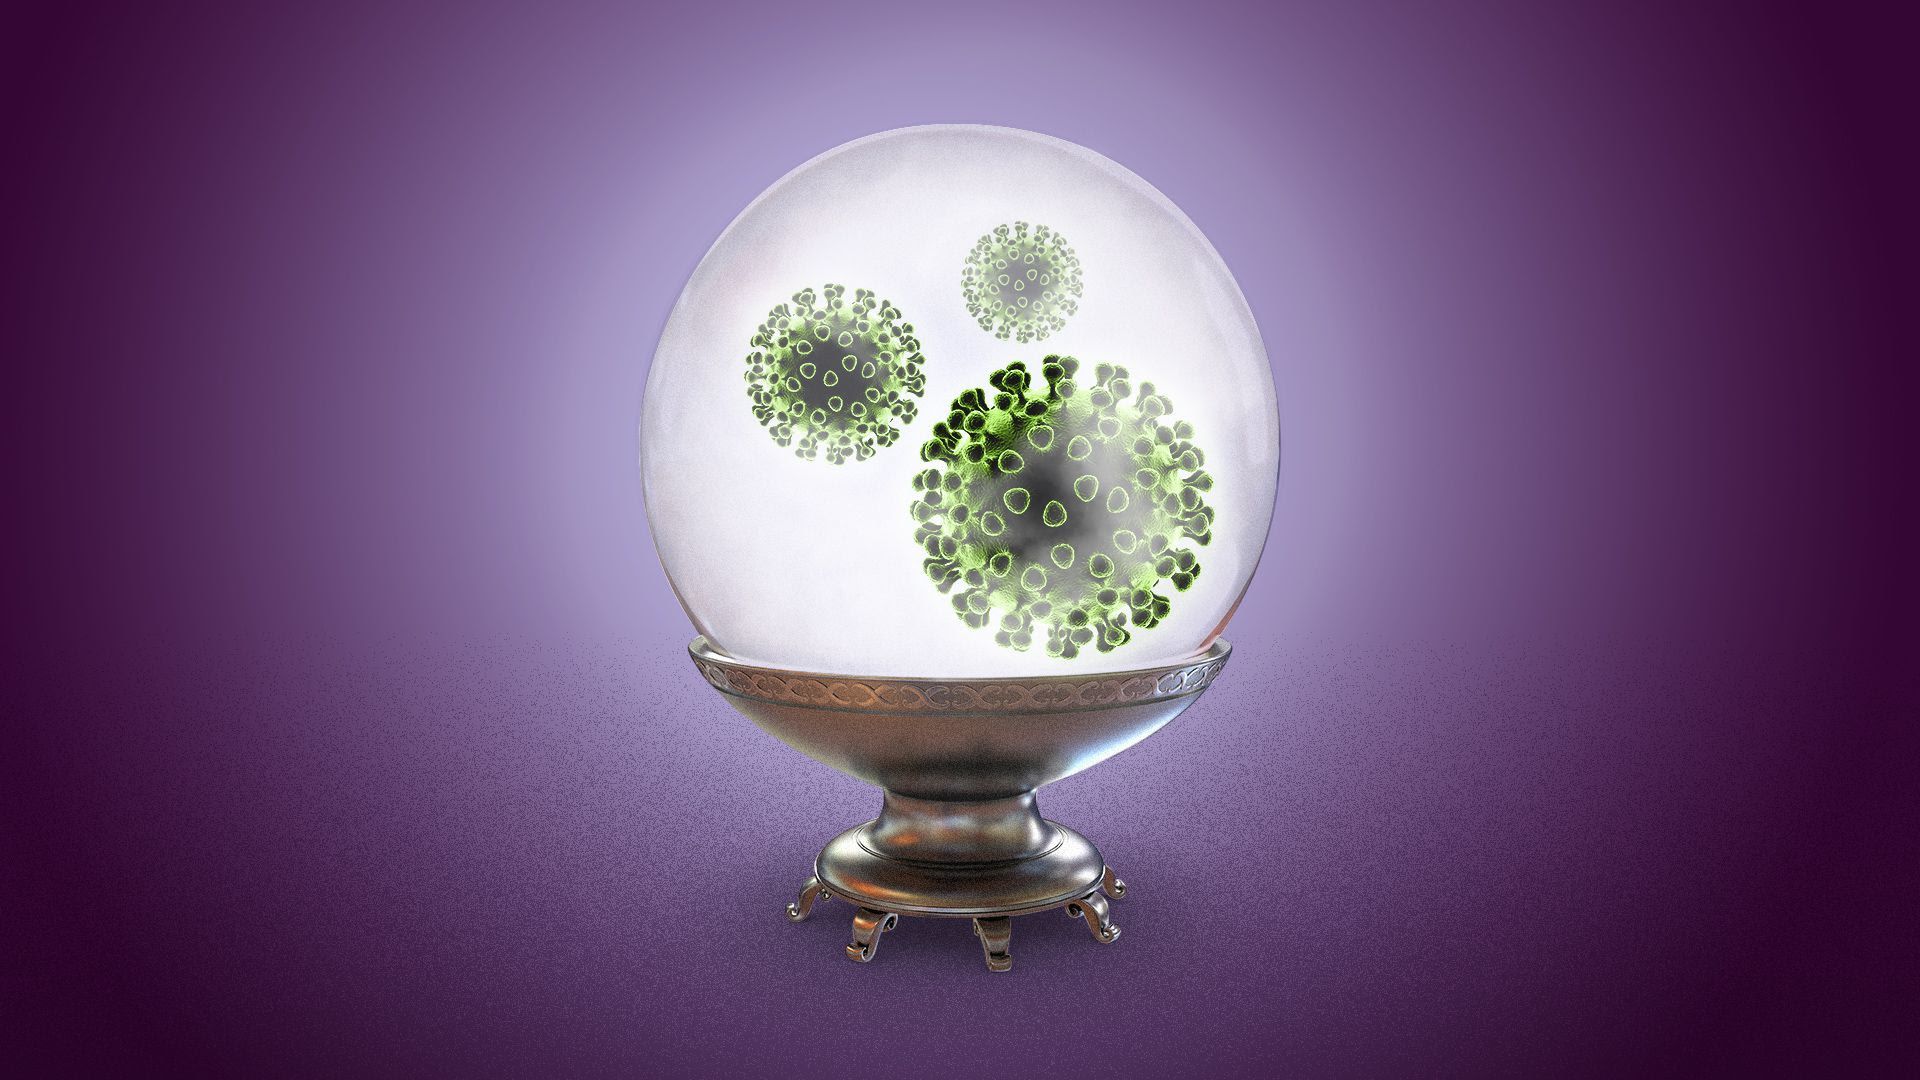 Illustration of glowing globe with virus cells in it